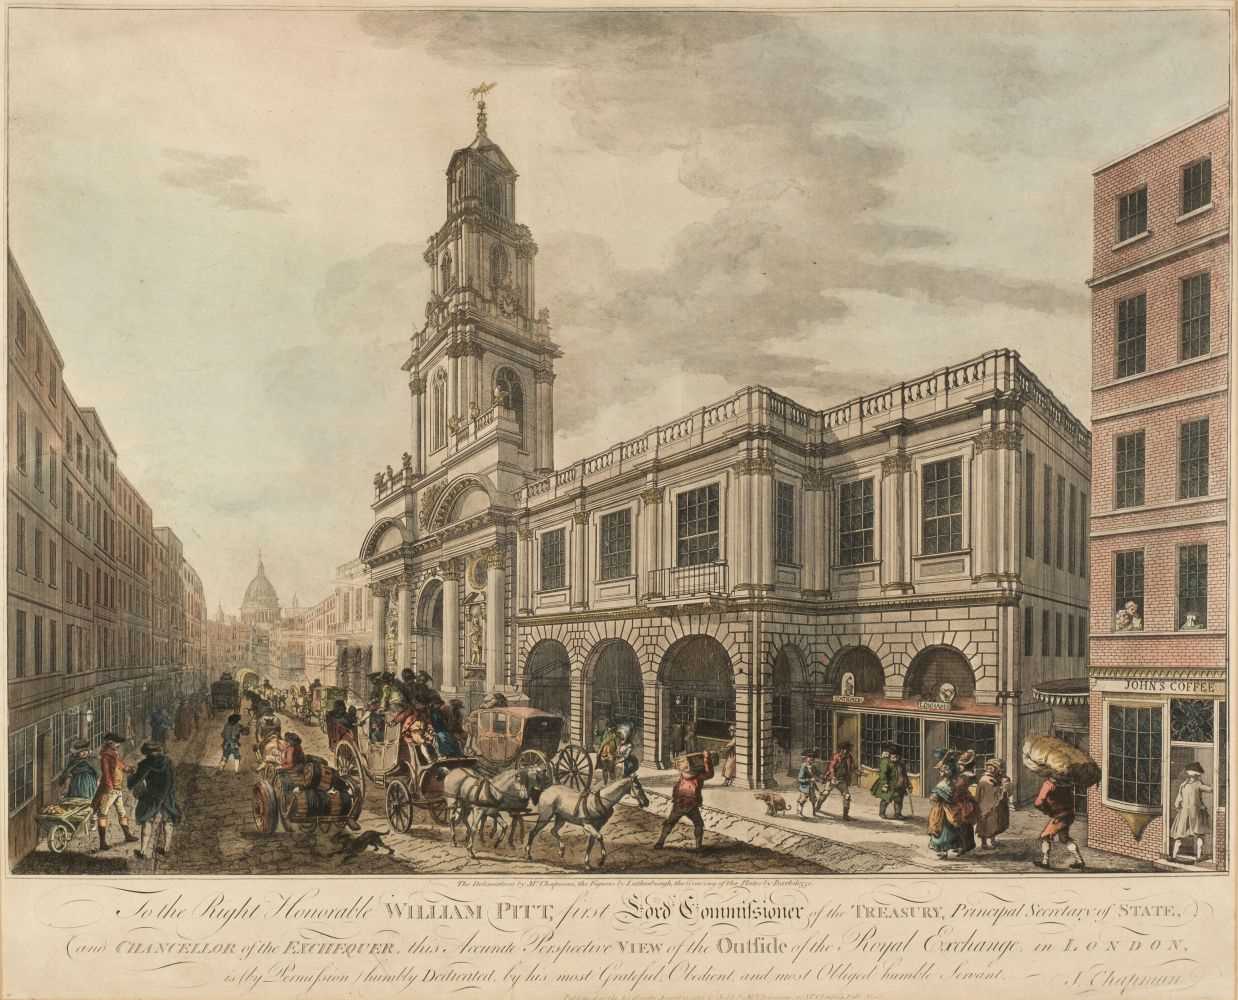 Lot 212 - London. Chapman (J.), .., Accurate Perspective View of the Outside of the Royal Exchange..., 1788